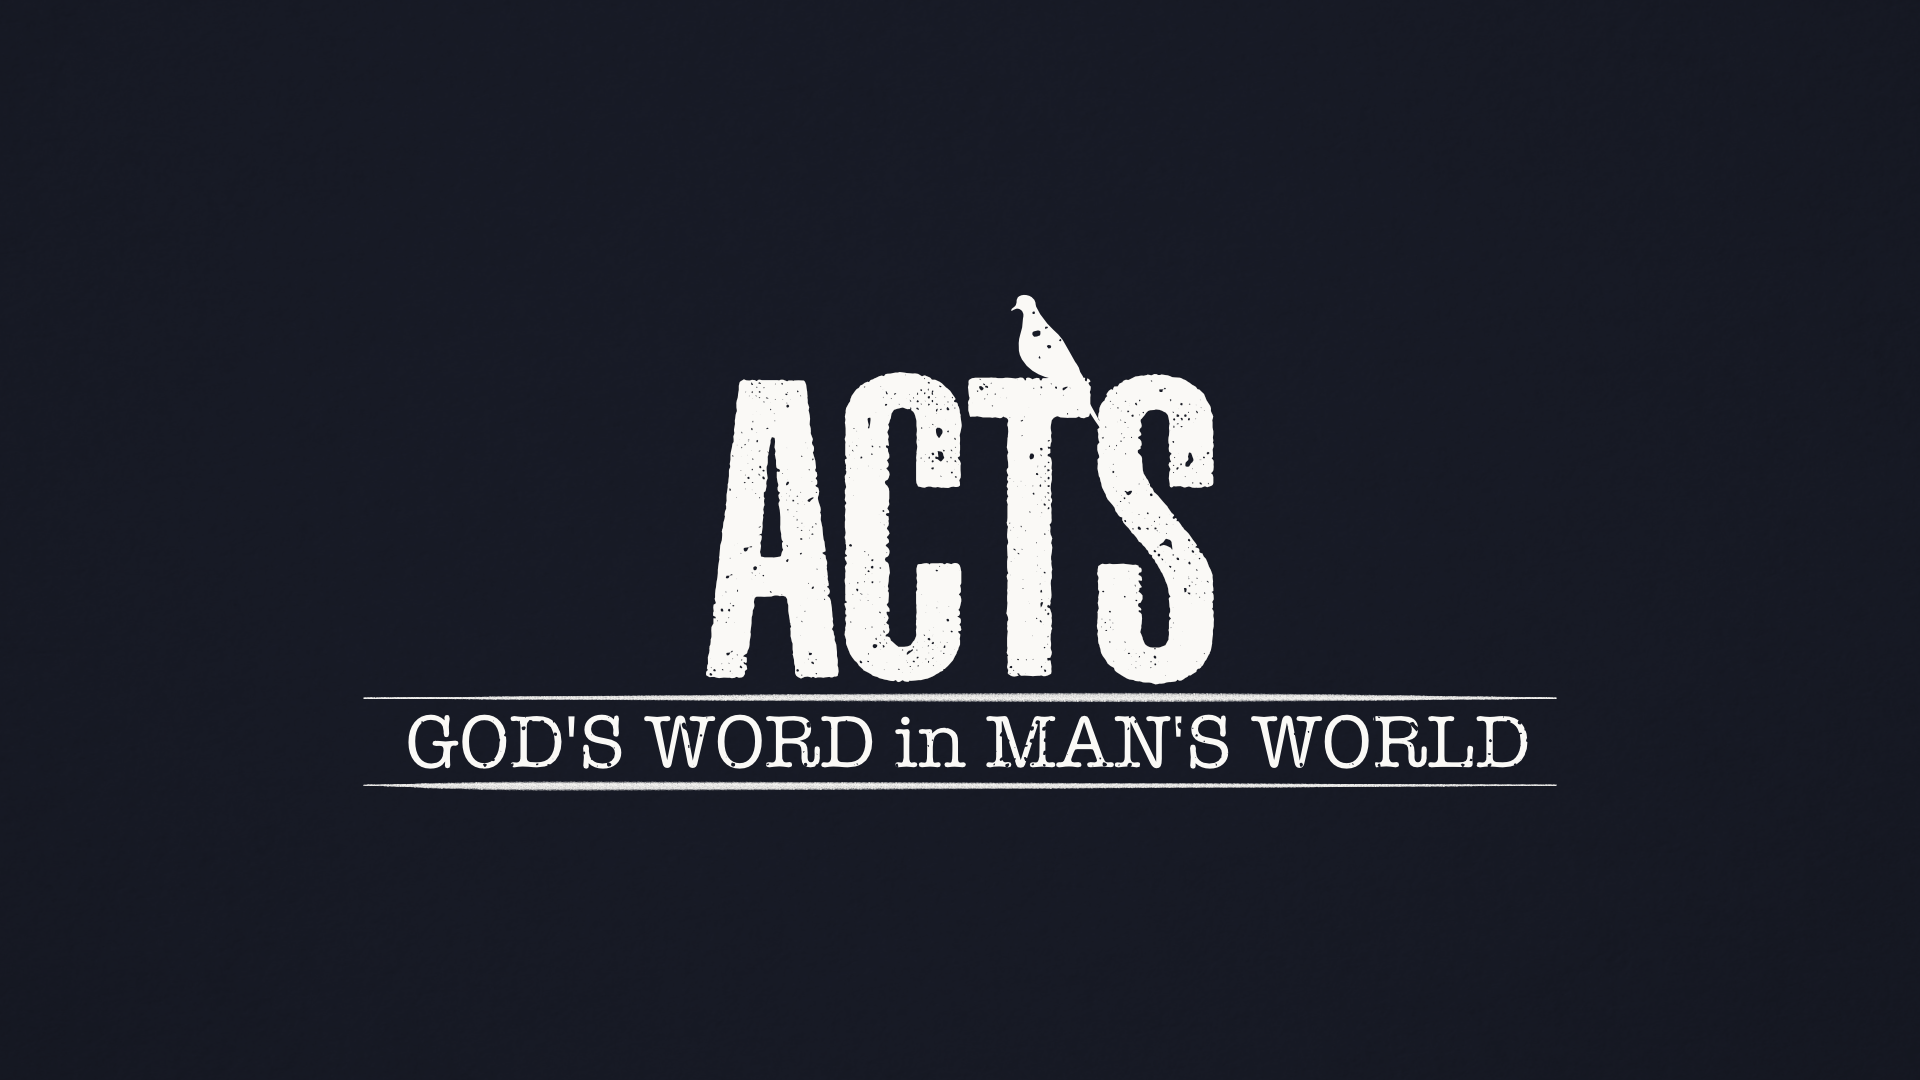 Acts 4:32-37 -- Freedom and Charity